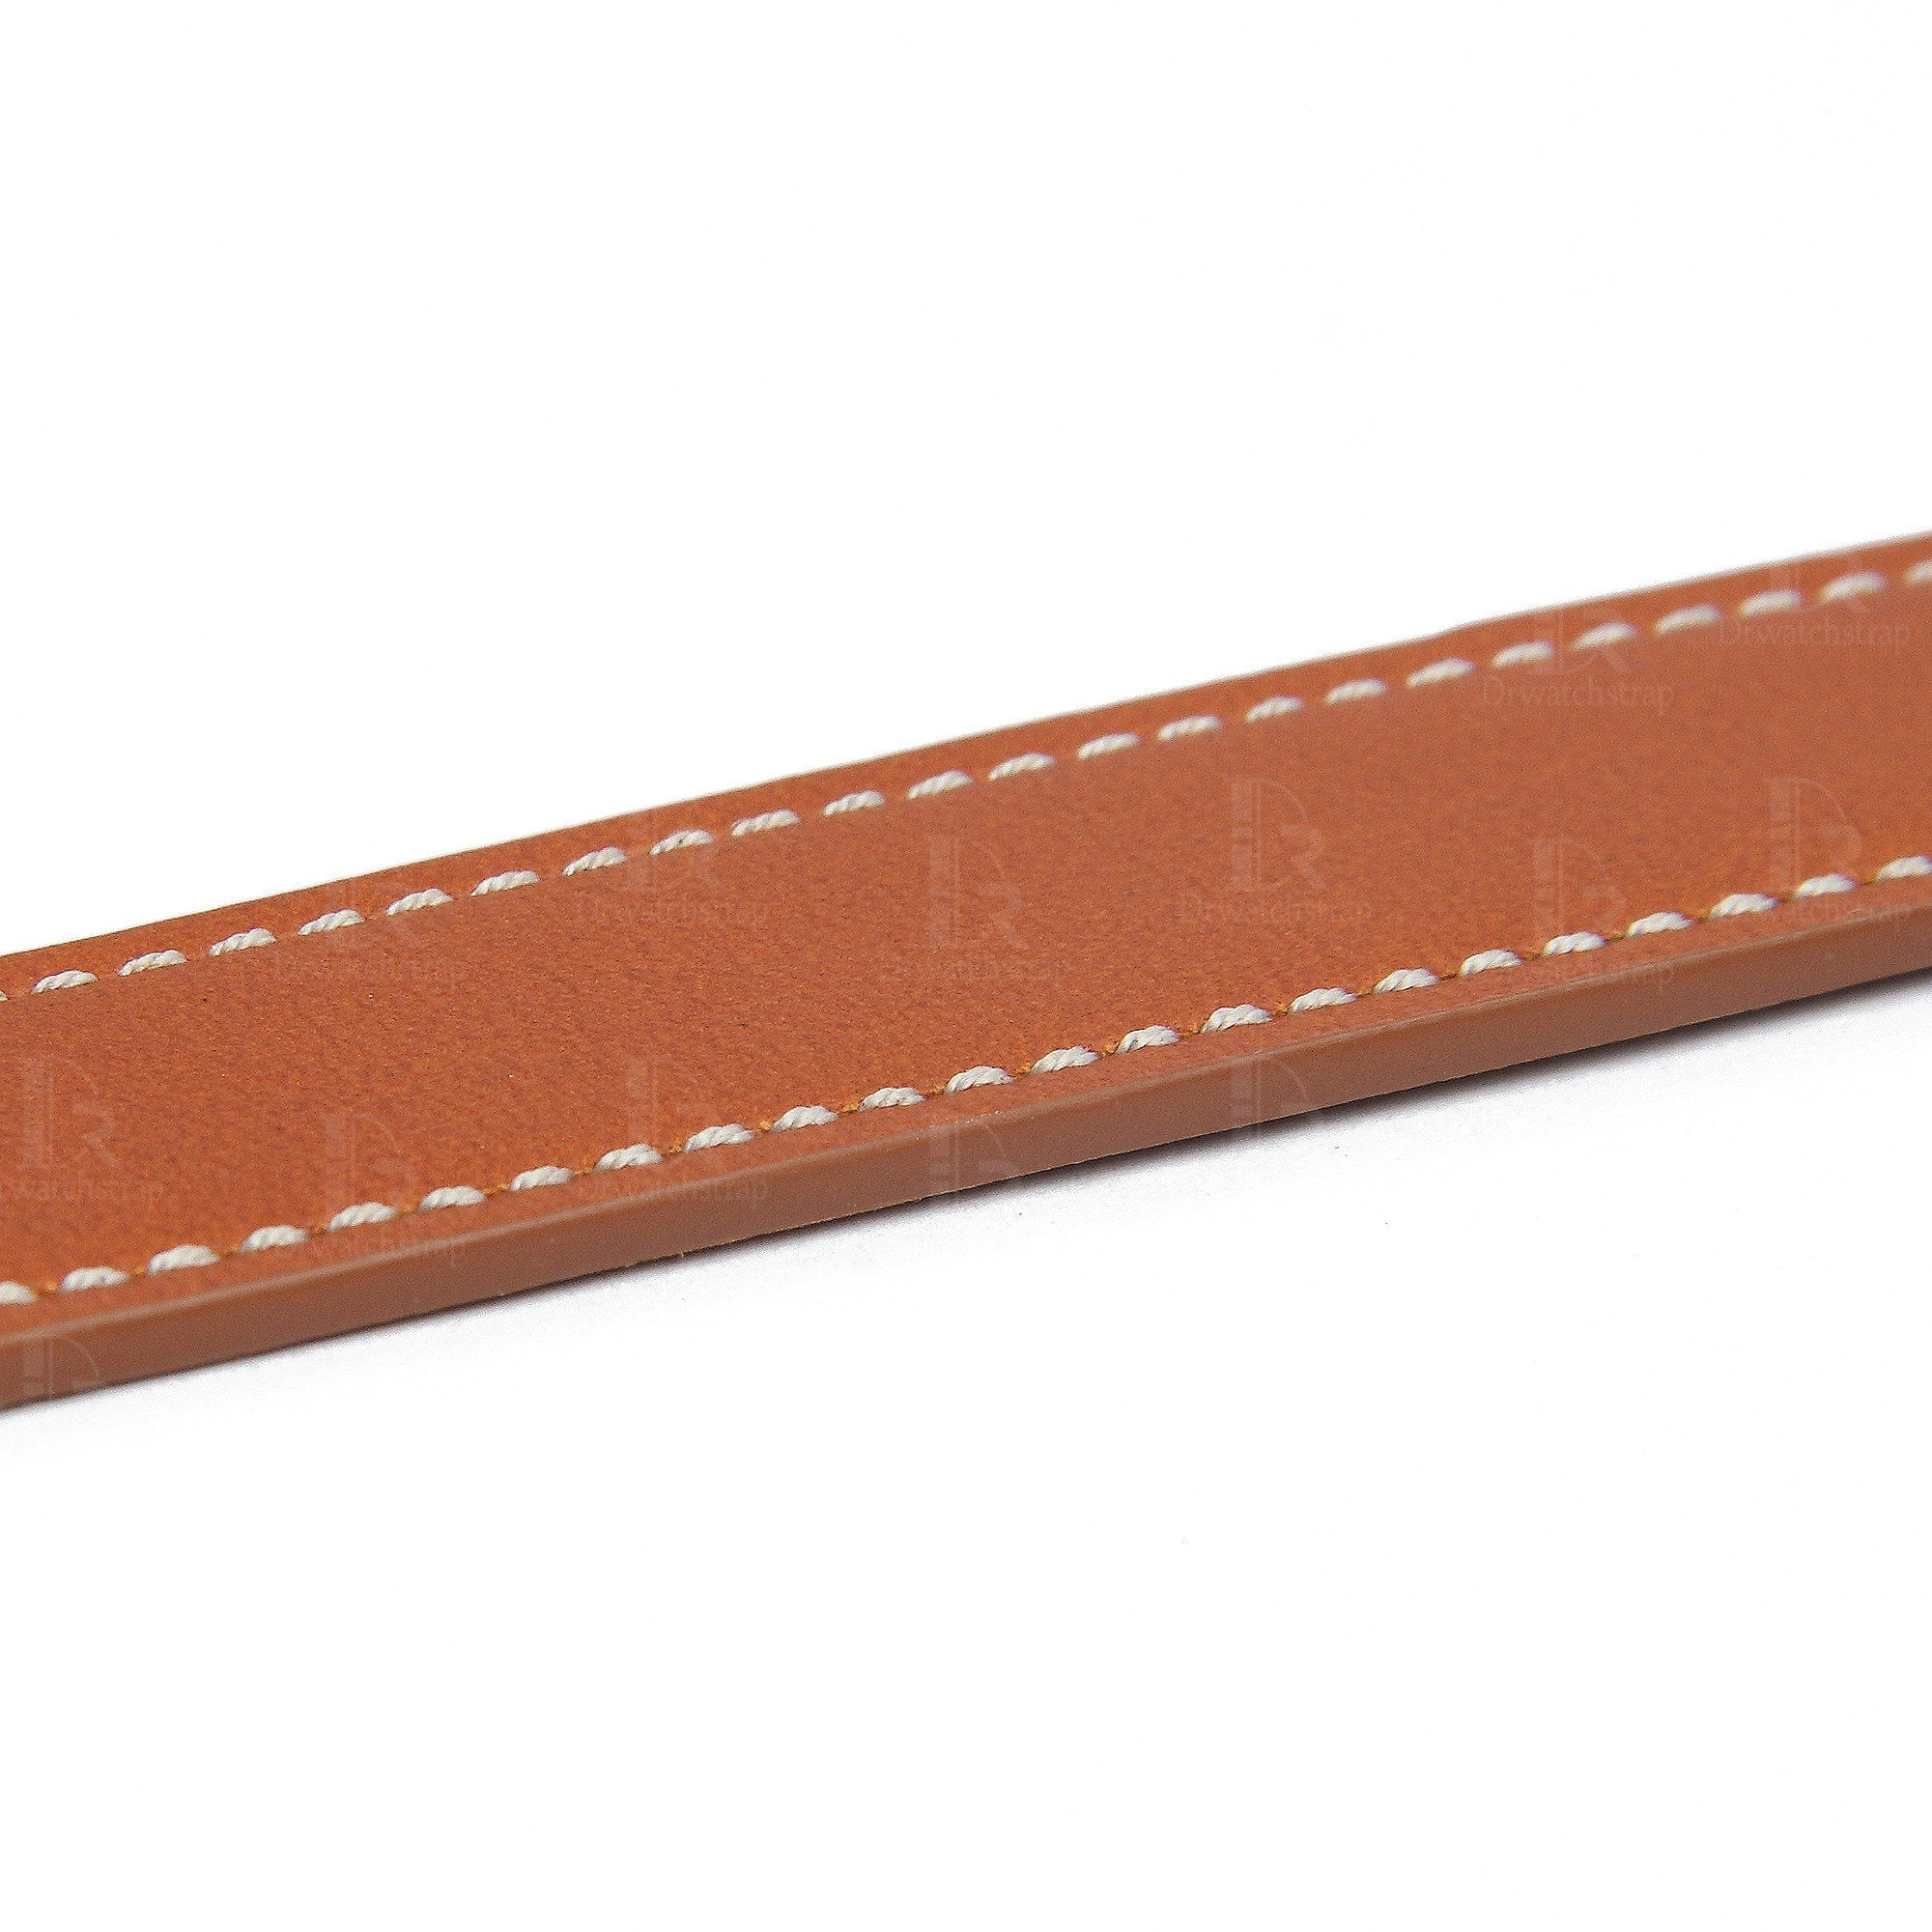 Hermes double loop strap watch OEM orange watch band with white stitching